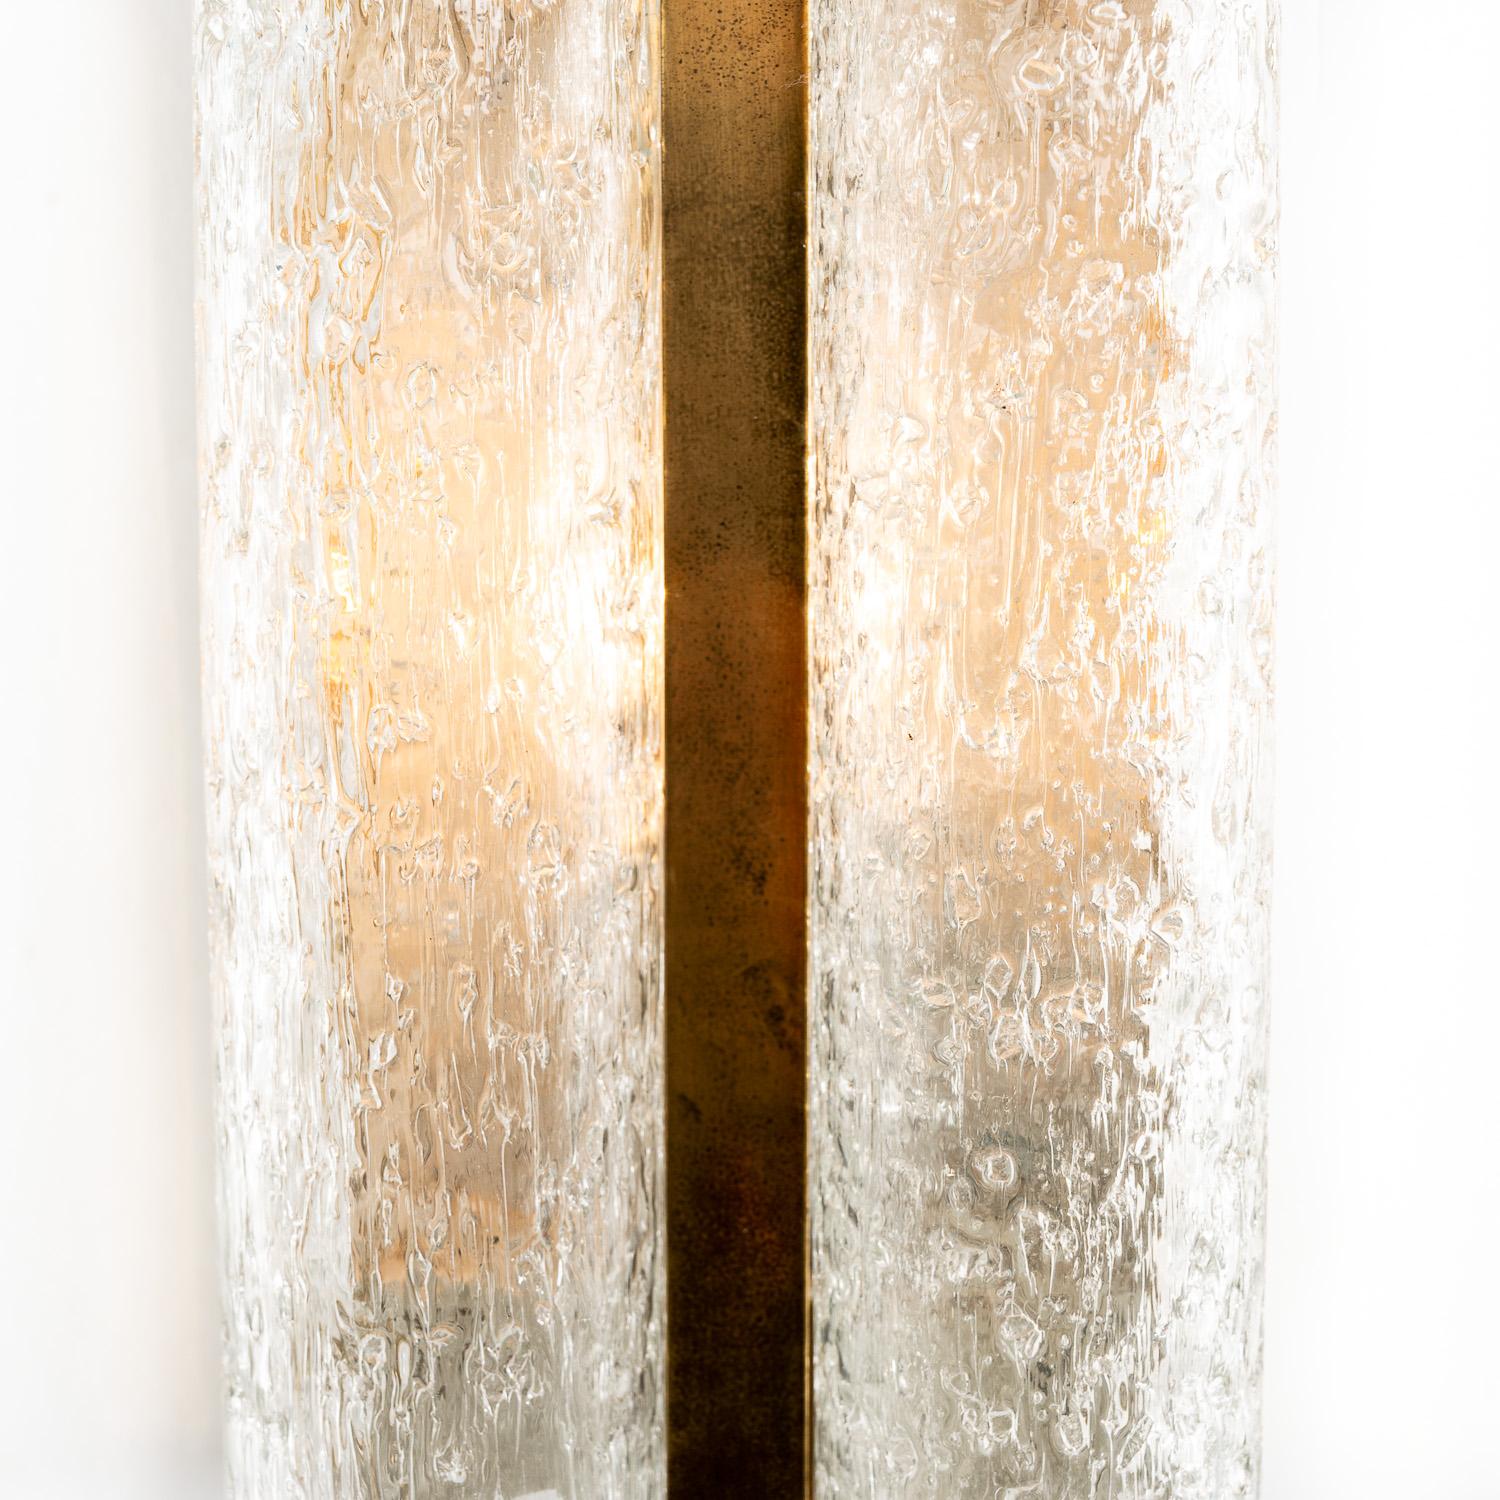 1960's Brass, Metal & Glass Tubes Sconces by Doria In Good Condition For Sale In Amsterdam, NH